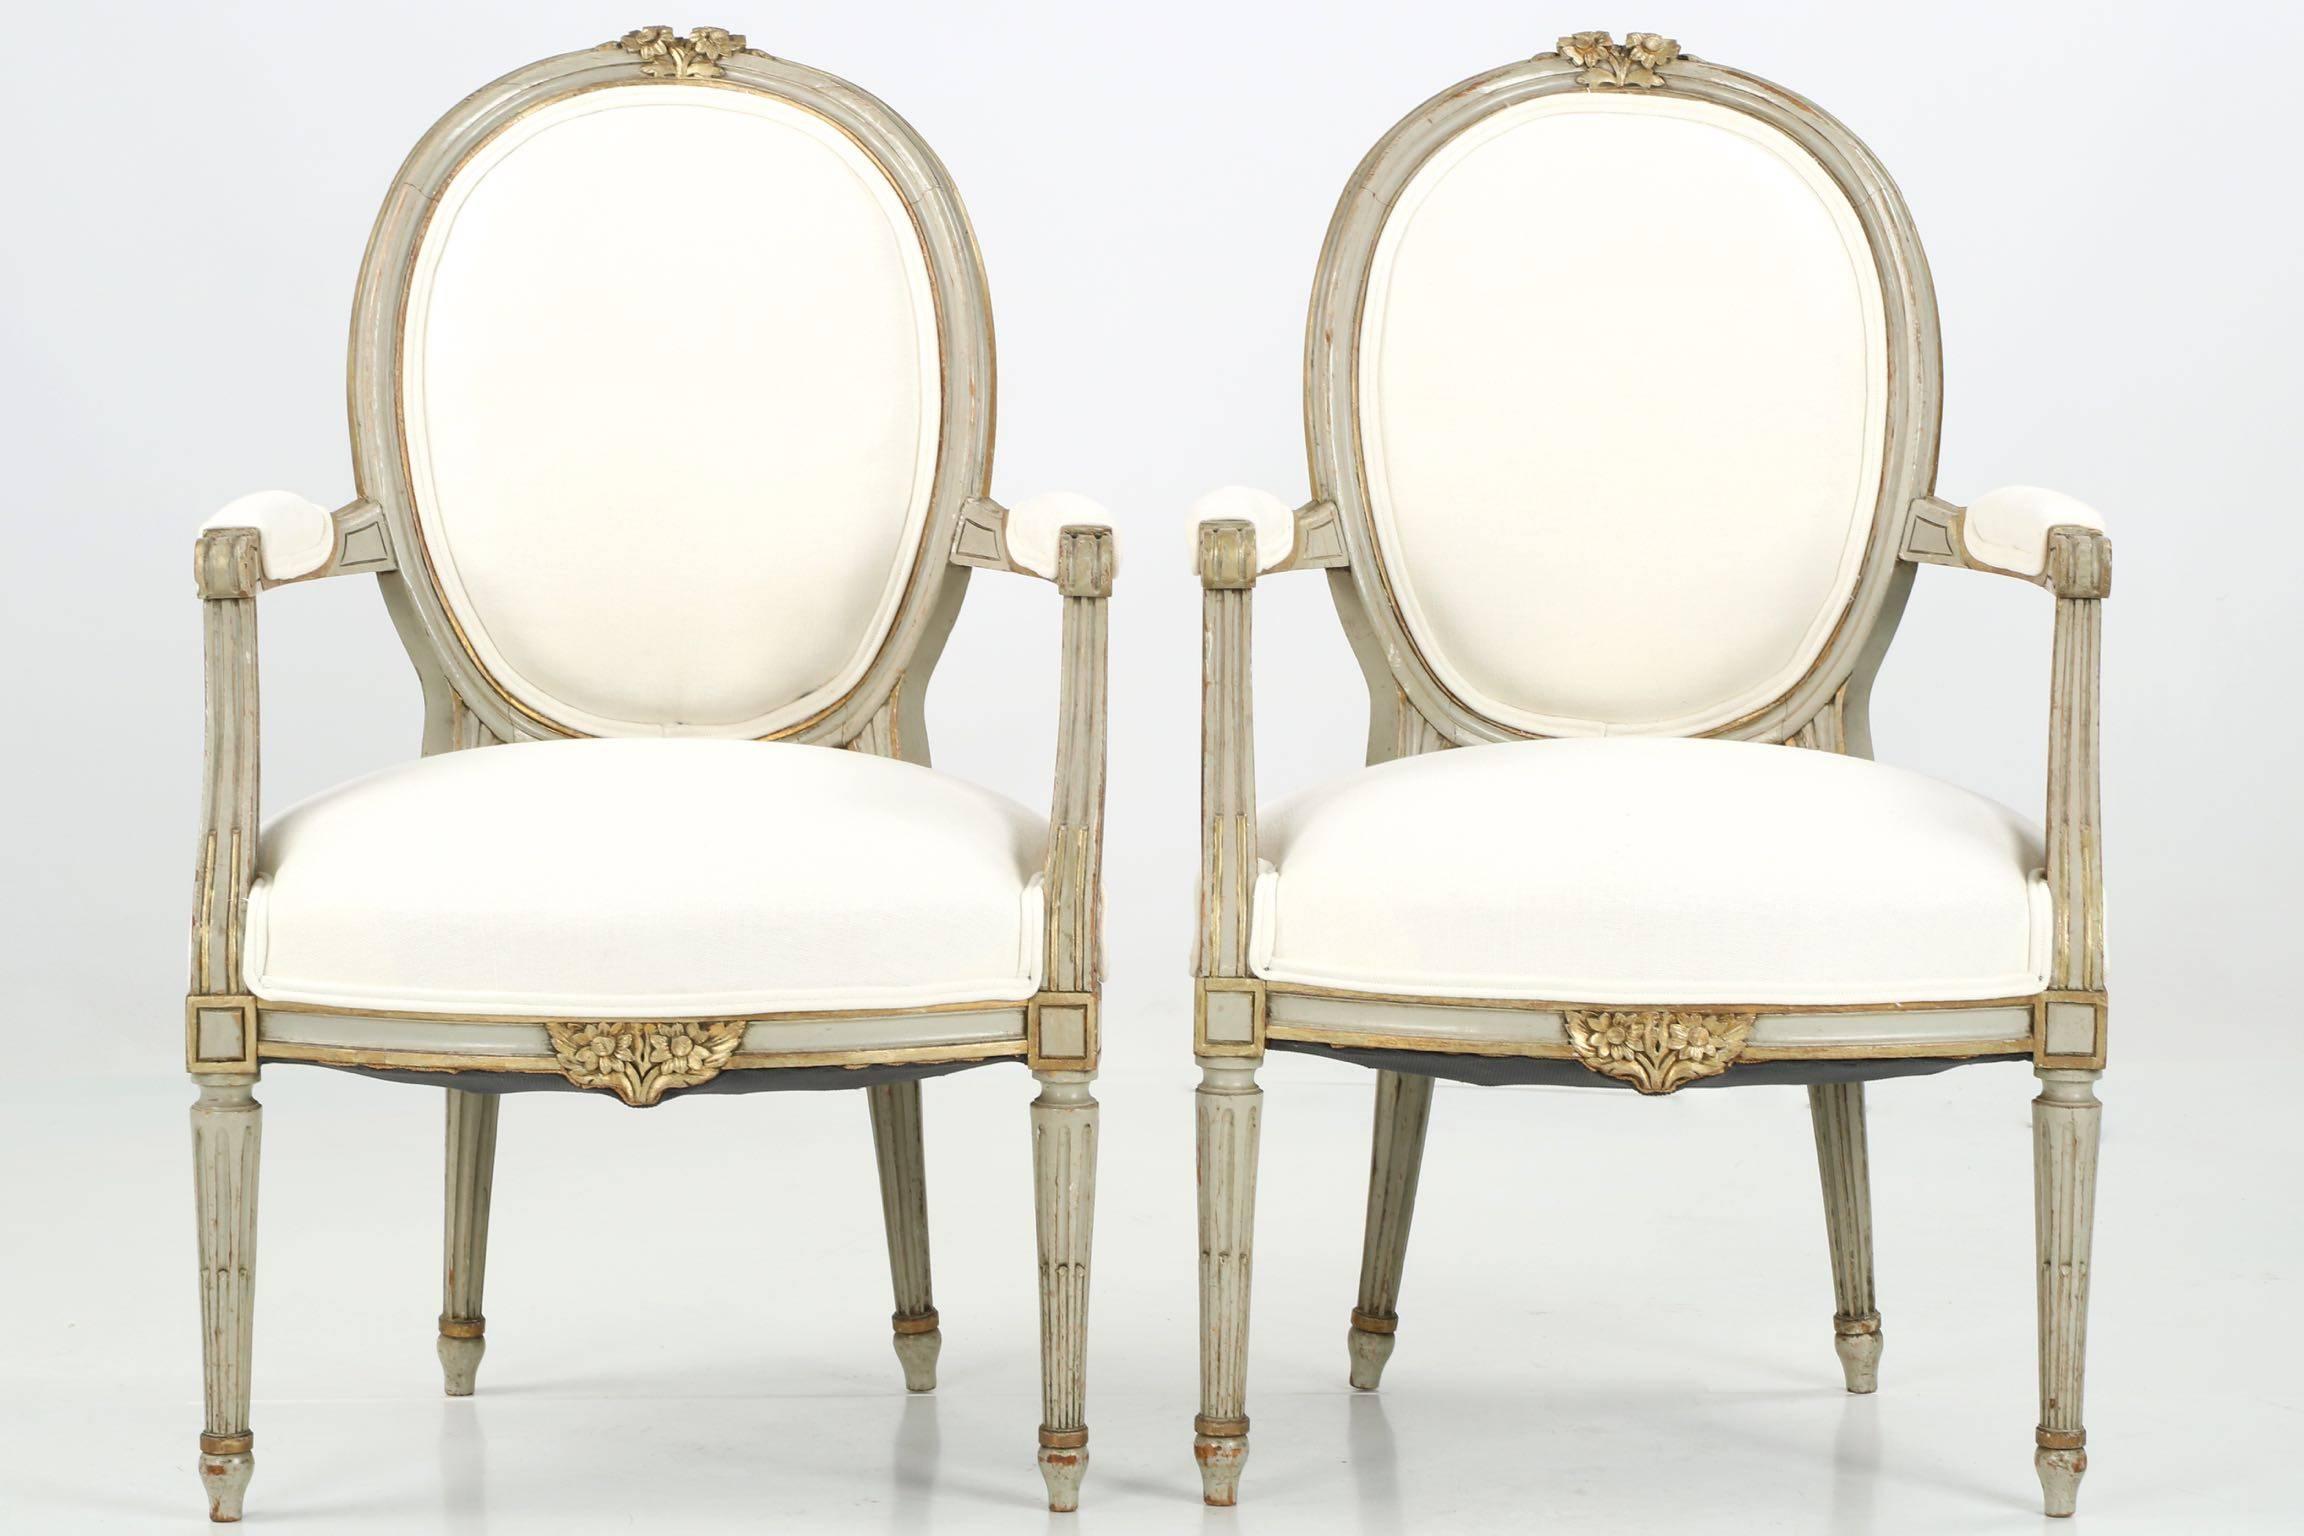 This very attractive pair of French fauteuils from the first half of the 20th Century retains an early and well worn painted surface with gilded highlights.  The simple molded frames are embellished with floral carvings in the crest and apron, both